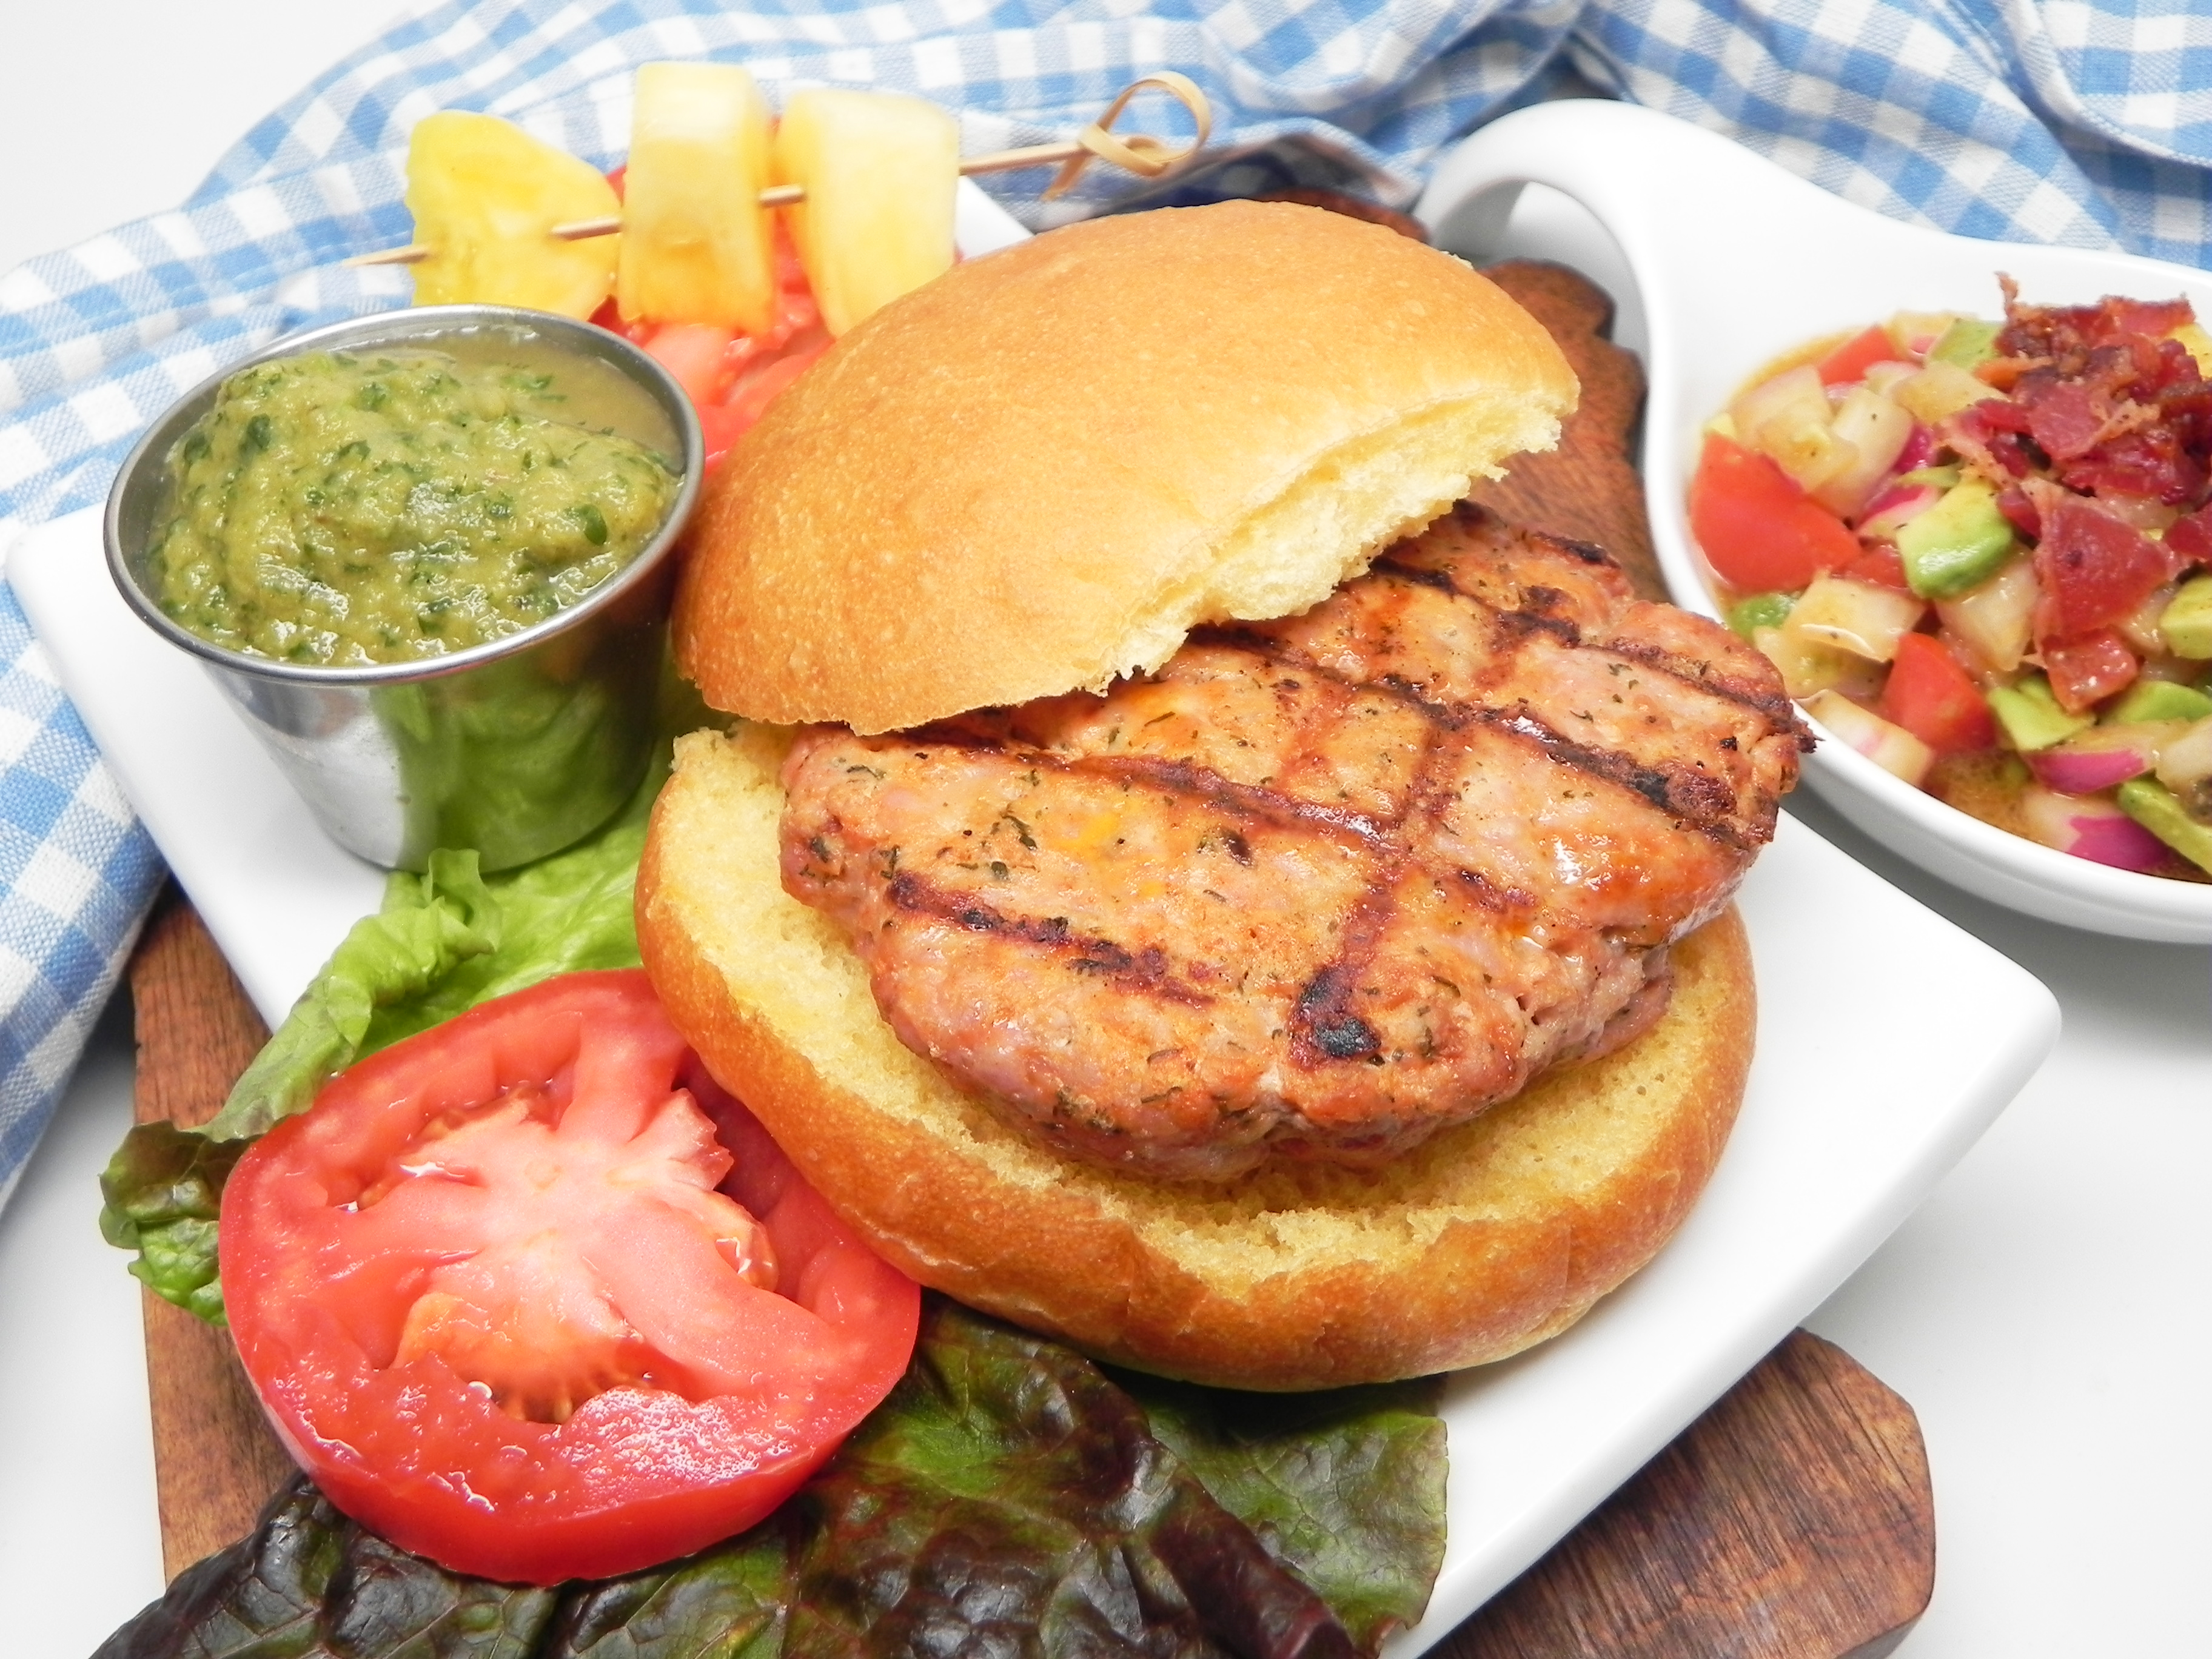 Grilled Pork Burgers with Pineapple Salsa